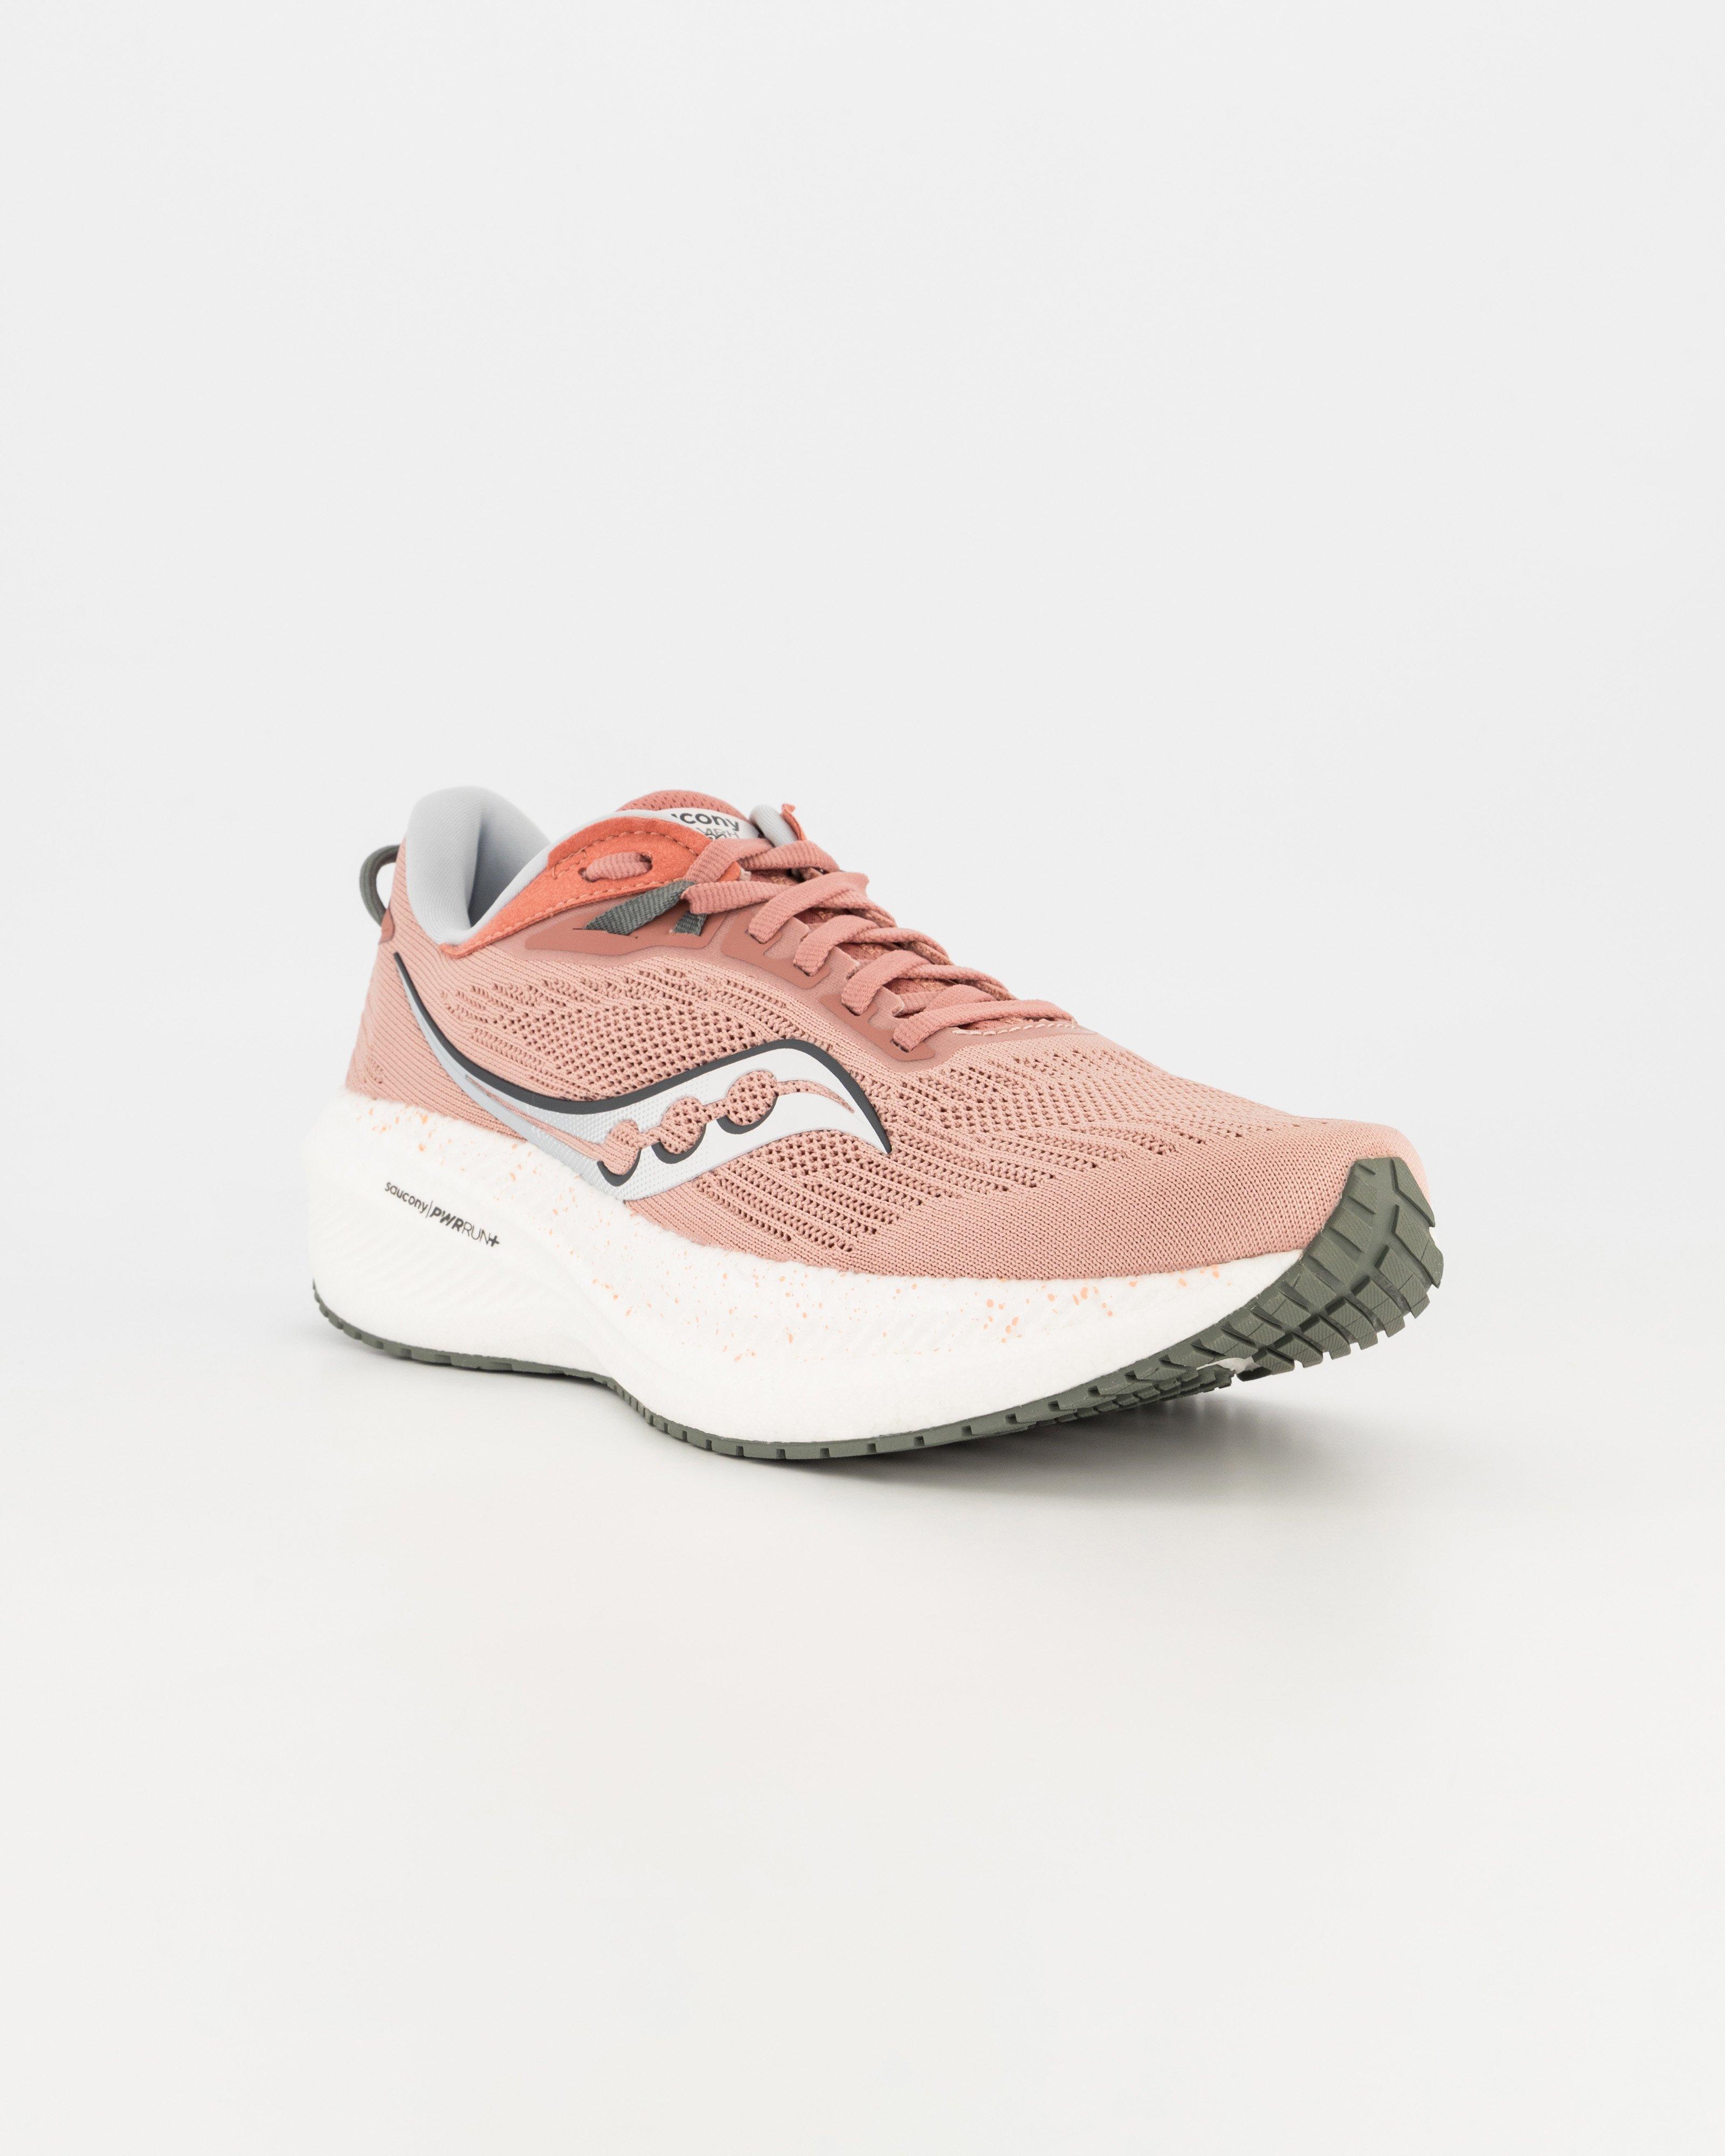 Saucony Women's Triumph 21 Road Running Shoes -  Dusty Pink